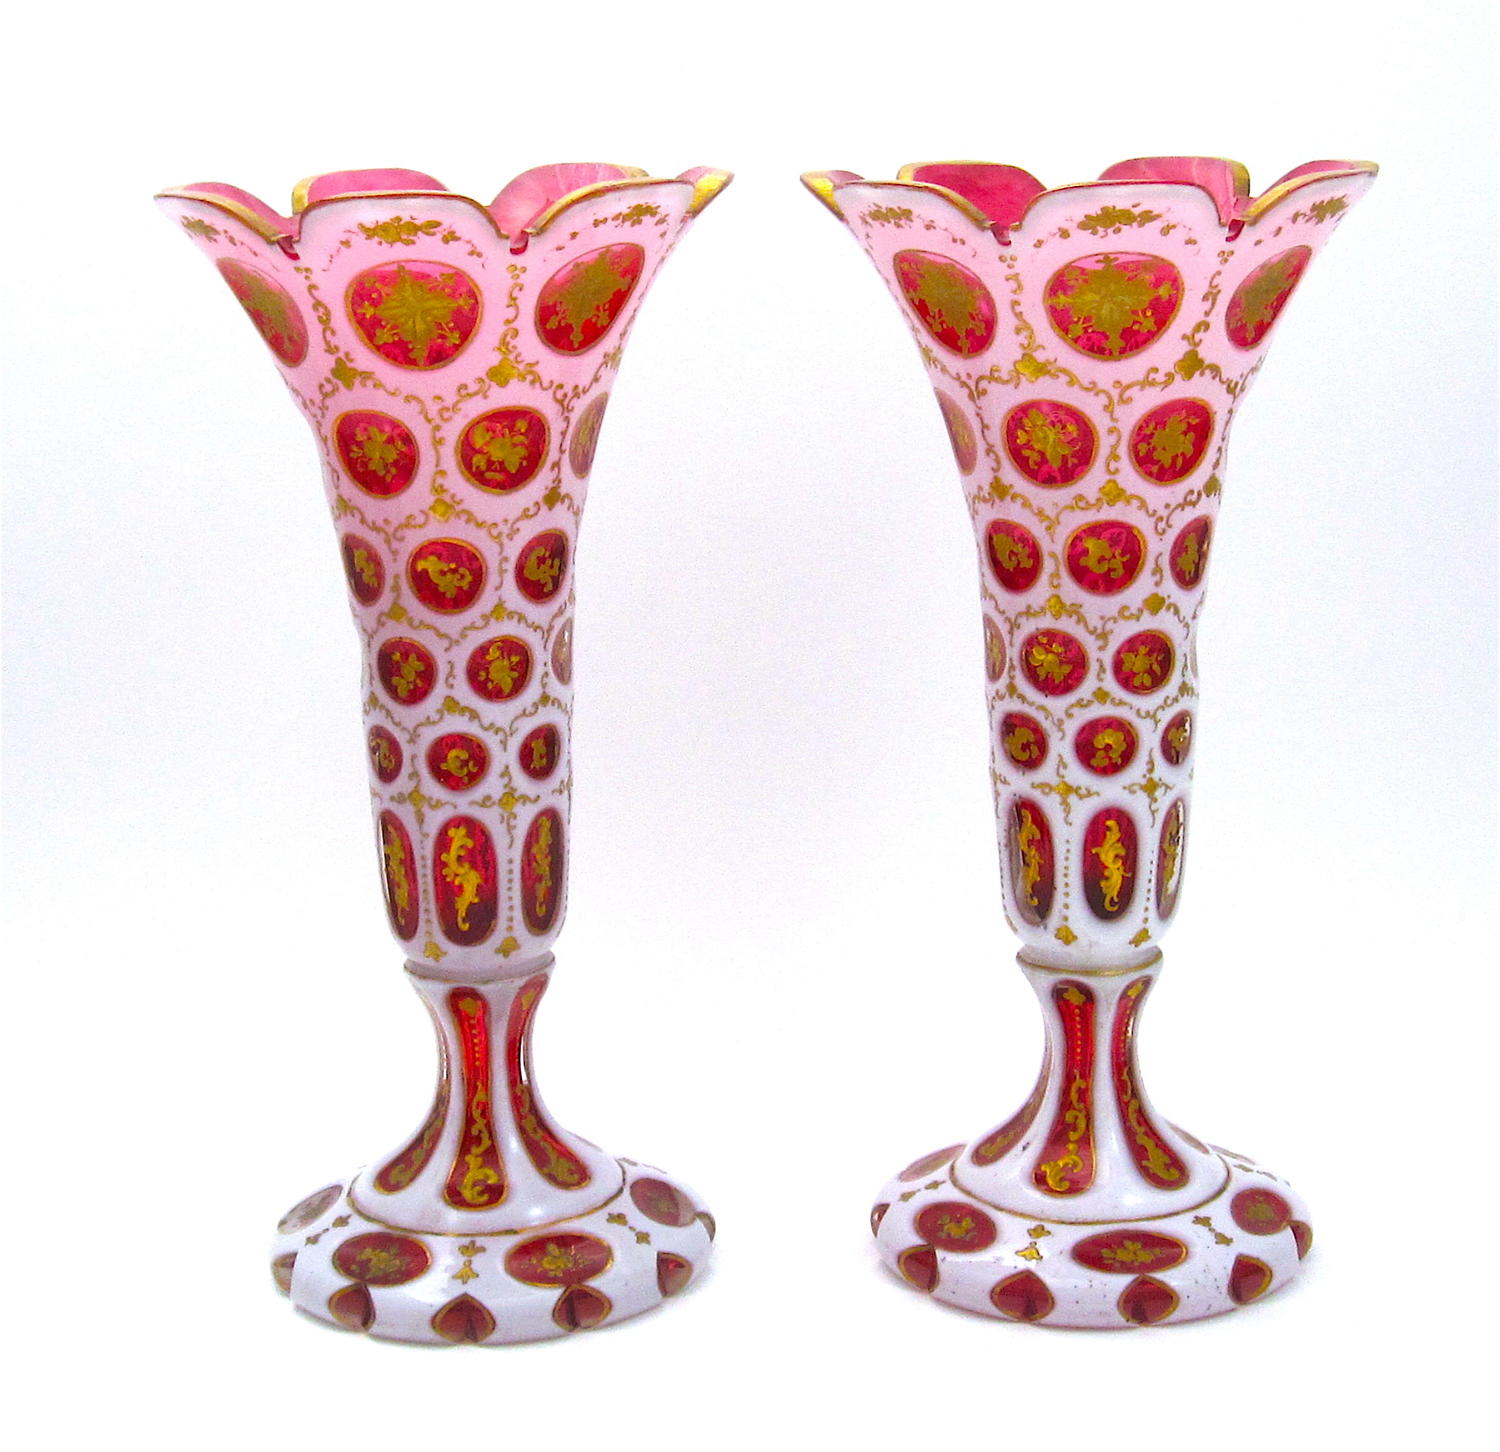 Pair of Antique Bohemian Cranberry and White Overlay Glass Vases